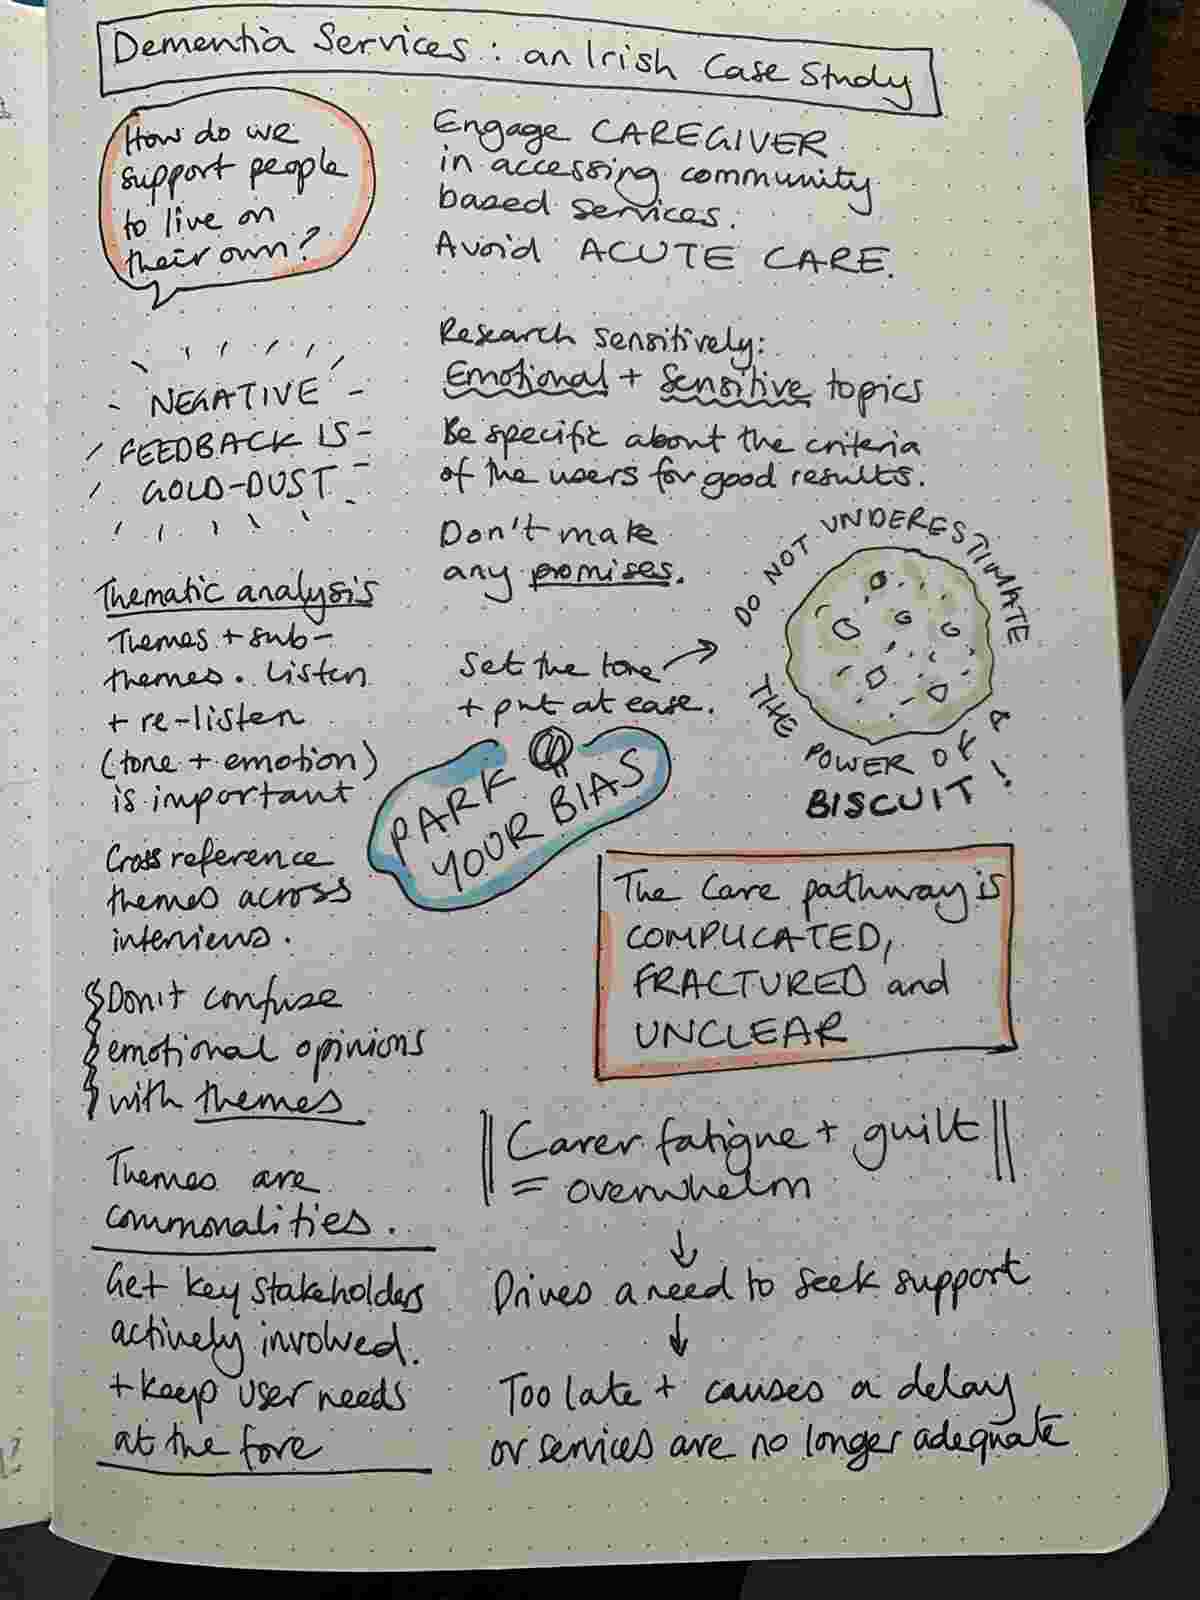 Sketch notes of the case study on dementia that Dani writes about. The information is displayed around little images relating to the topic